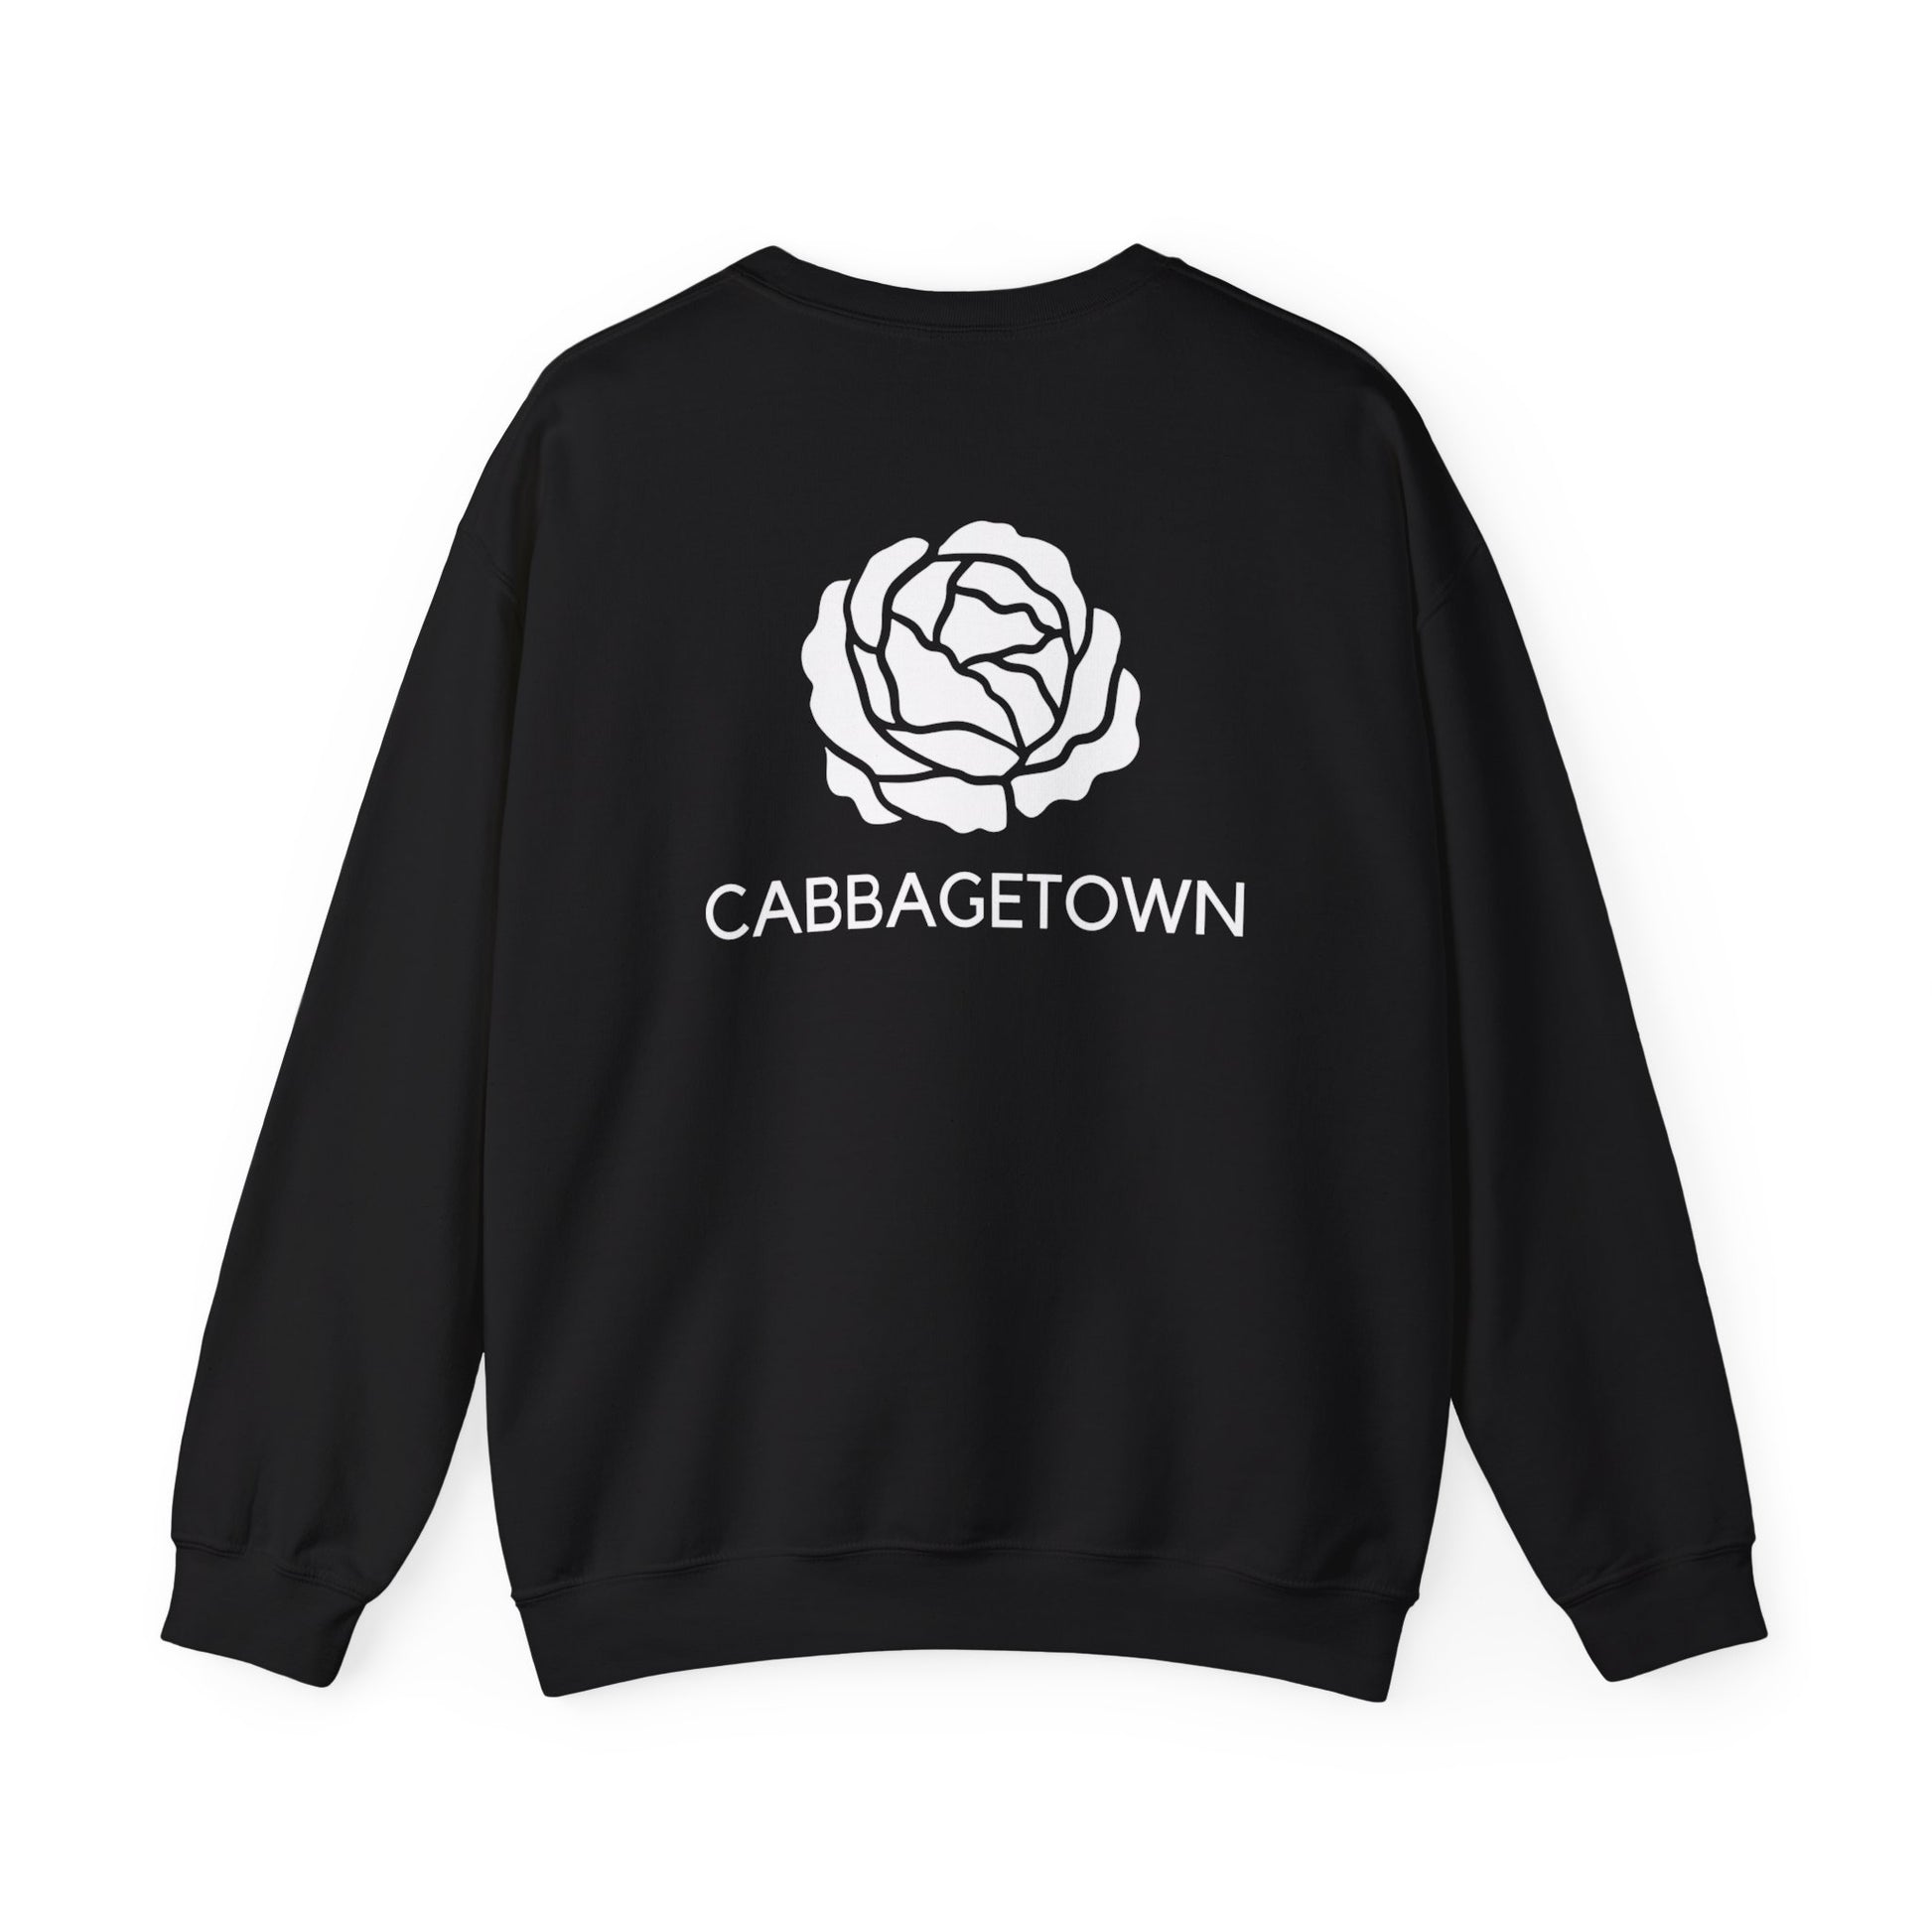 A black Unisex Heavy Blend™ Crewneck Monochrome Logo and Cabbagetown Sweatshirt by Printify, with a white rose graphic and the word "TORONTO CABBAGETOWN" printed below it, displayed on a plain white background.